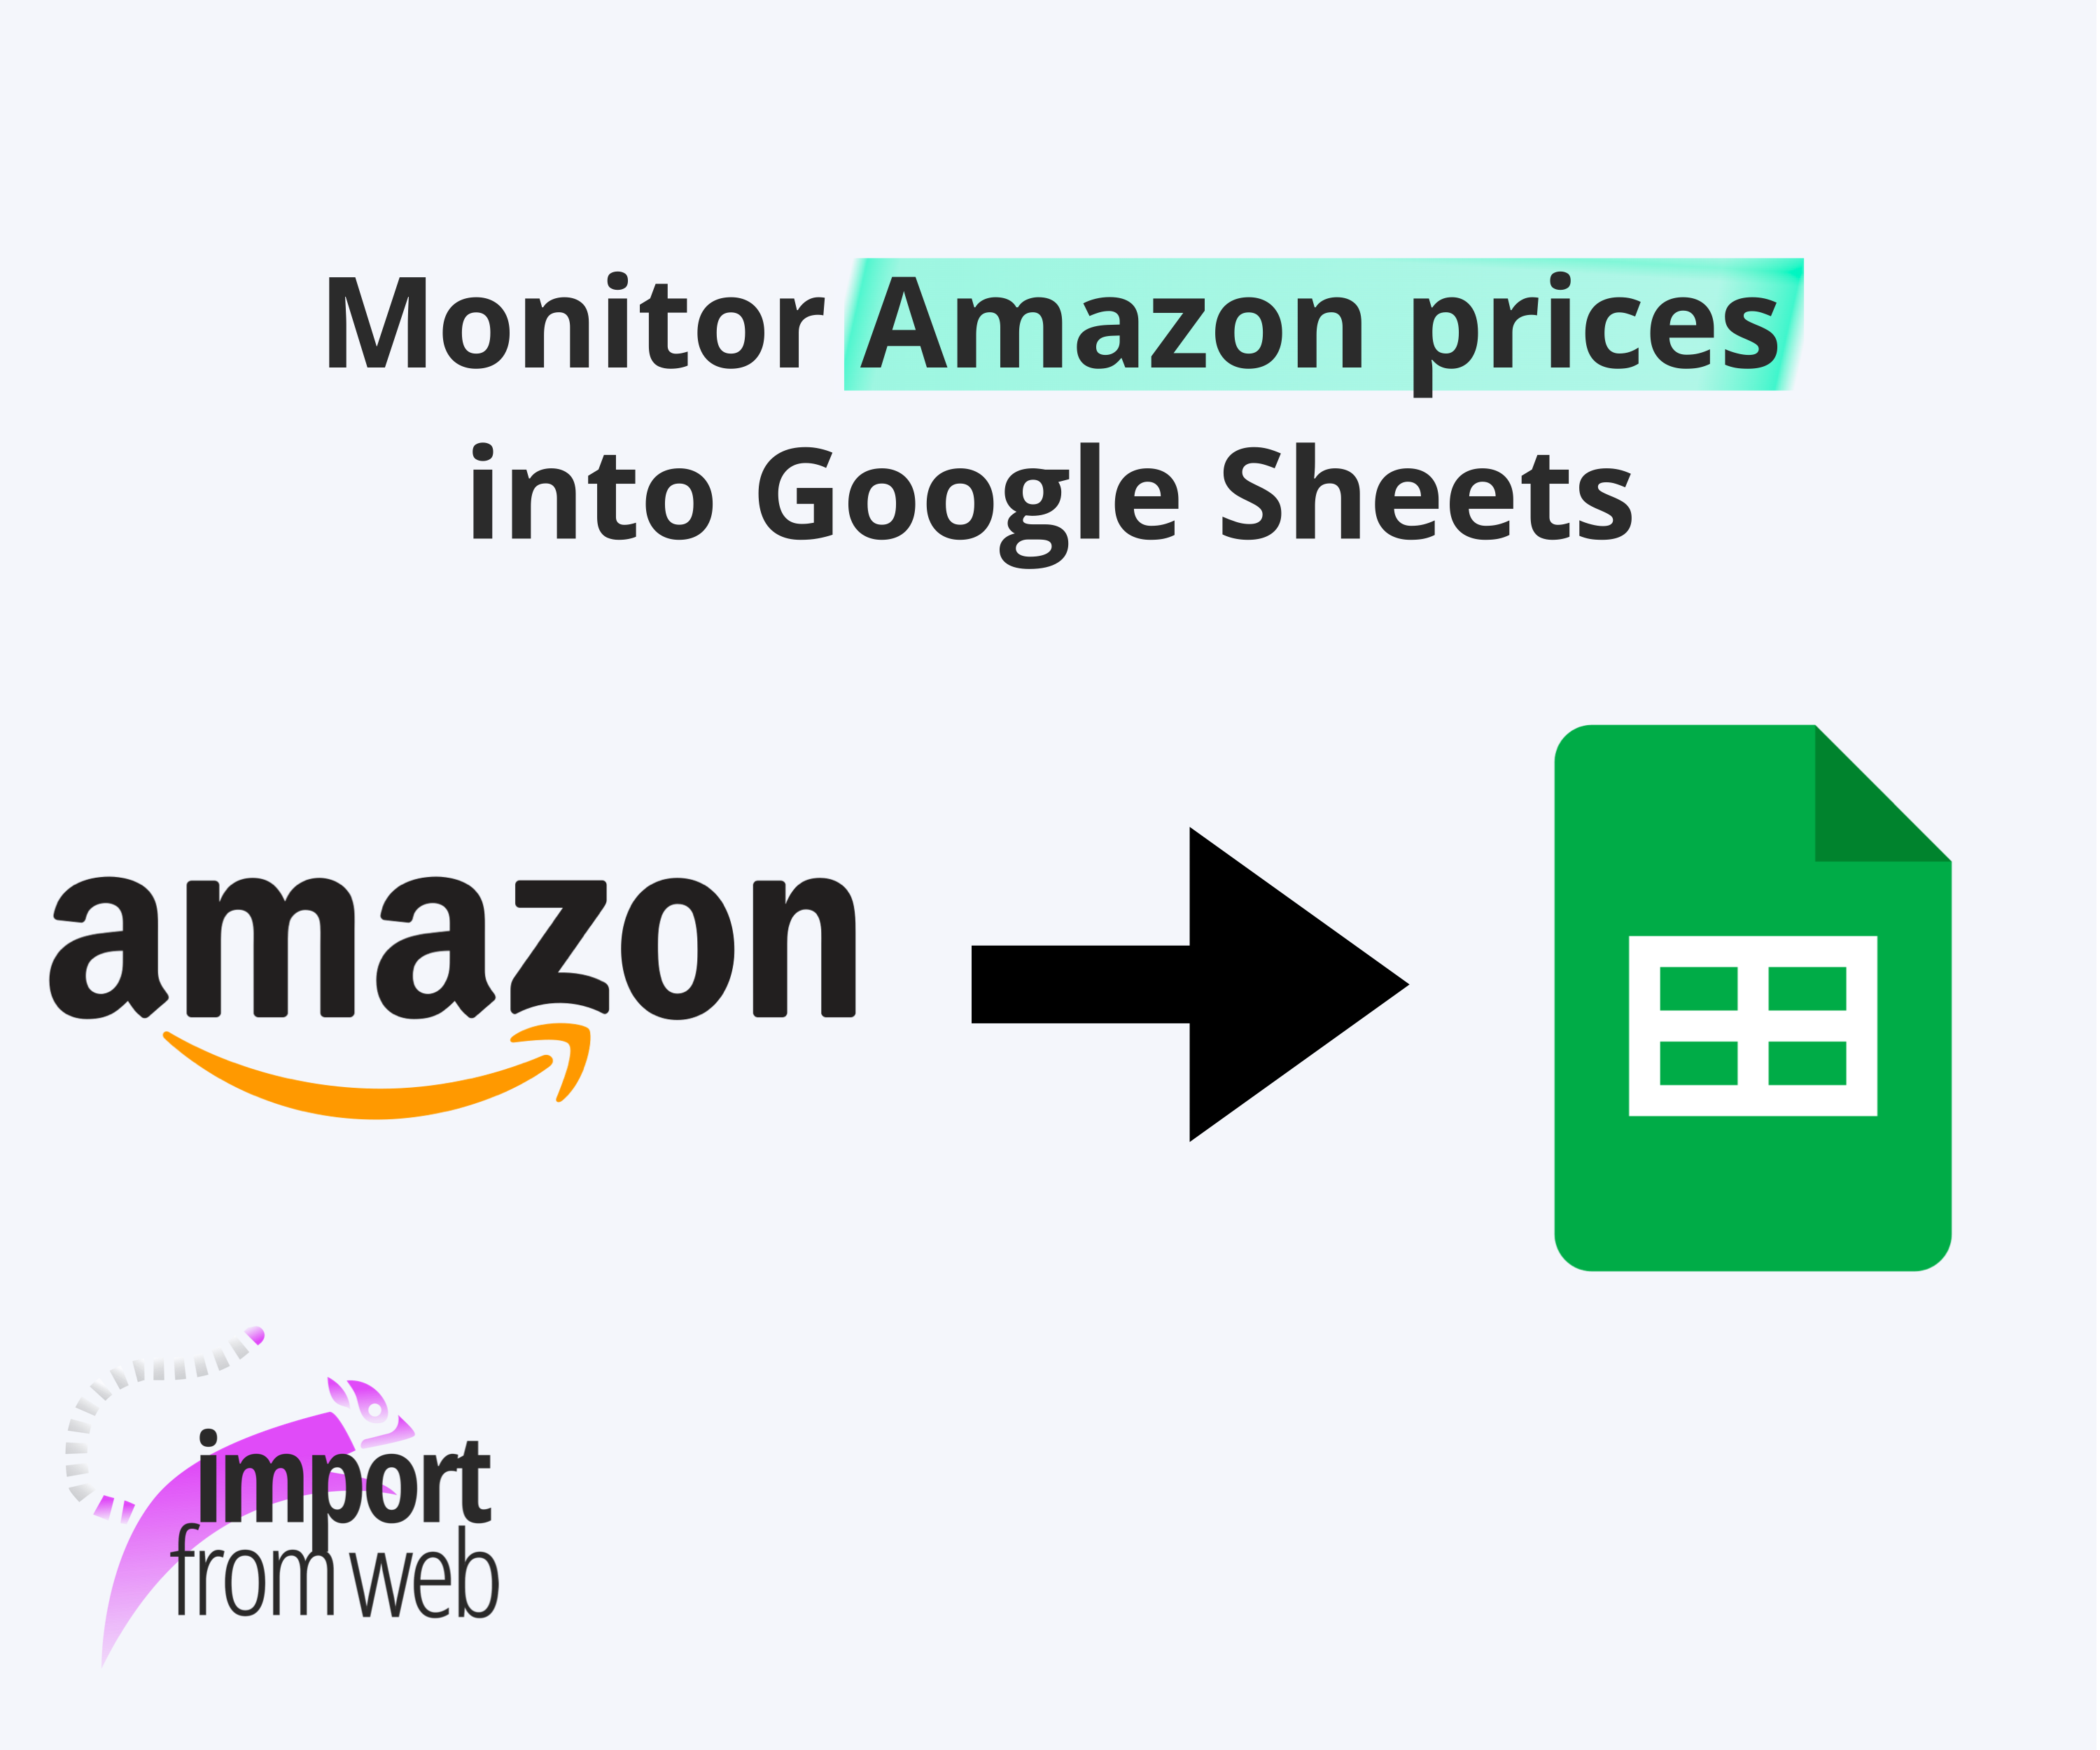 Monitor Amazon prices into Google Sheets